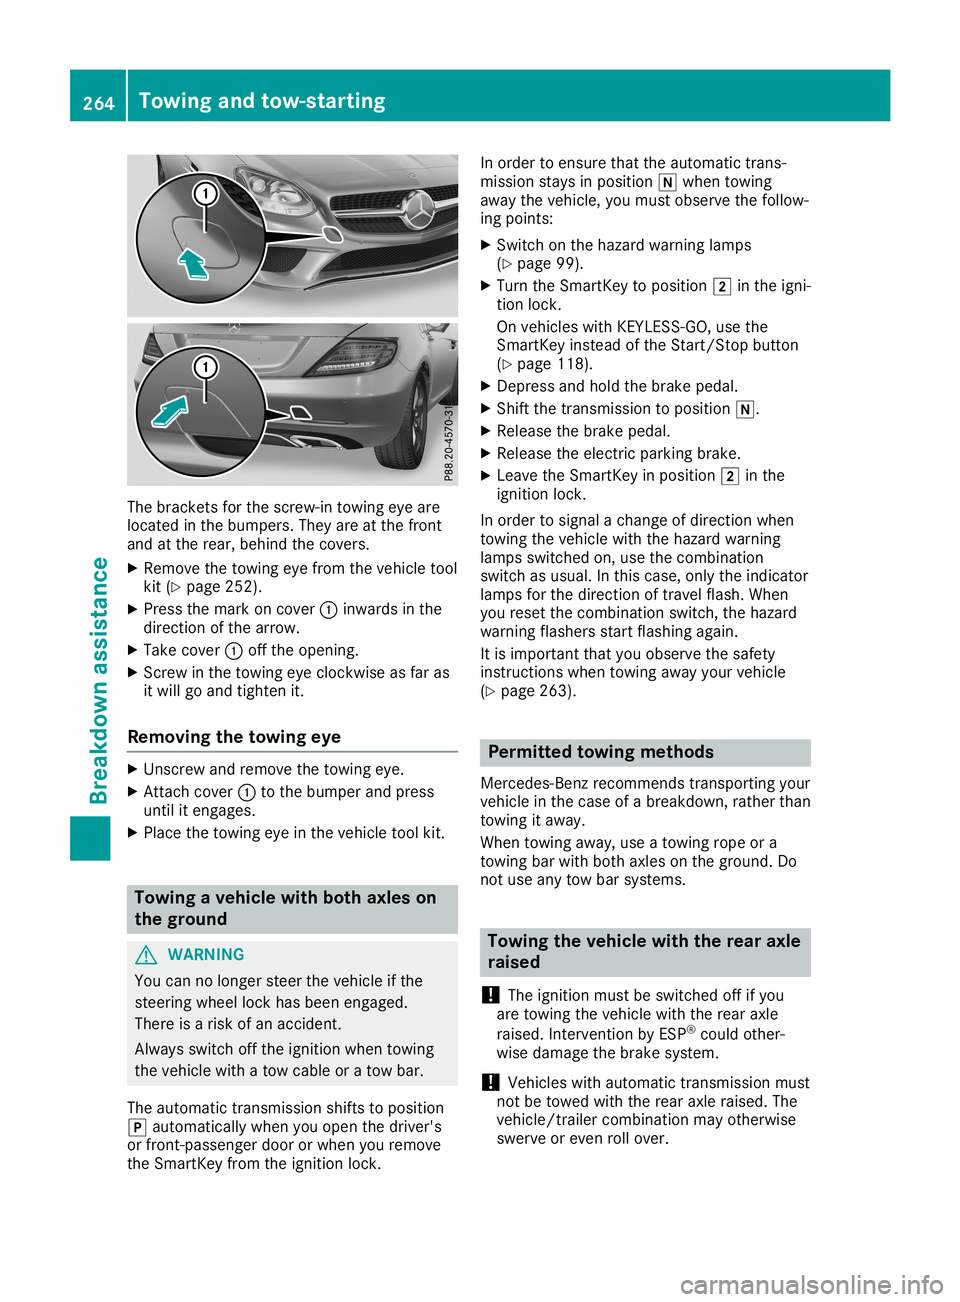 MERCEDES-BENZ SLC ROADSTER 2019  Owners Manual The
bracket sfor the screw-in towingeyeare
located inthe bumpers. Theyareatthe front
and atthe rear, behind thecovers.
X Remove thetowing eyefrom thevehicle tool
kit (Ypage 252).
X Press themark oncov